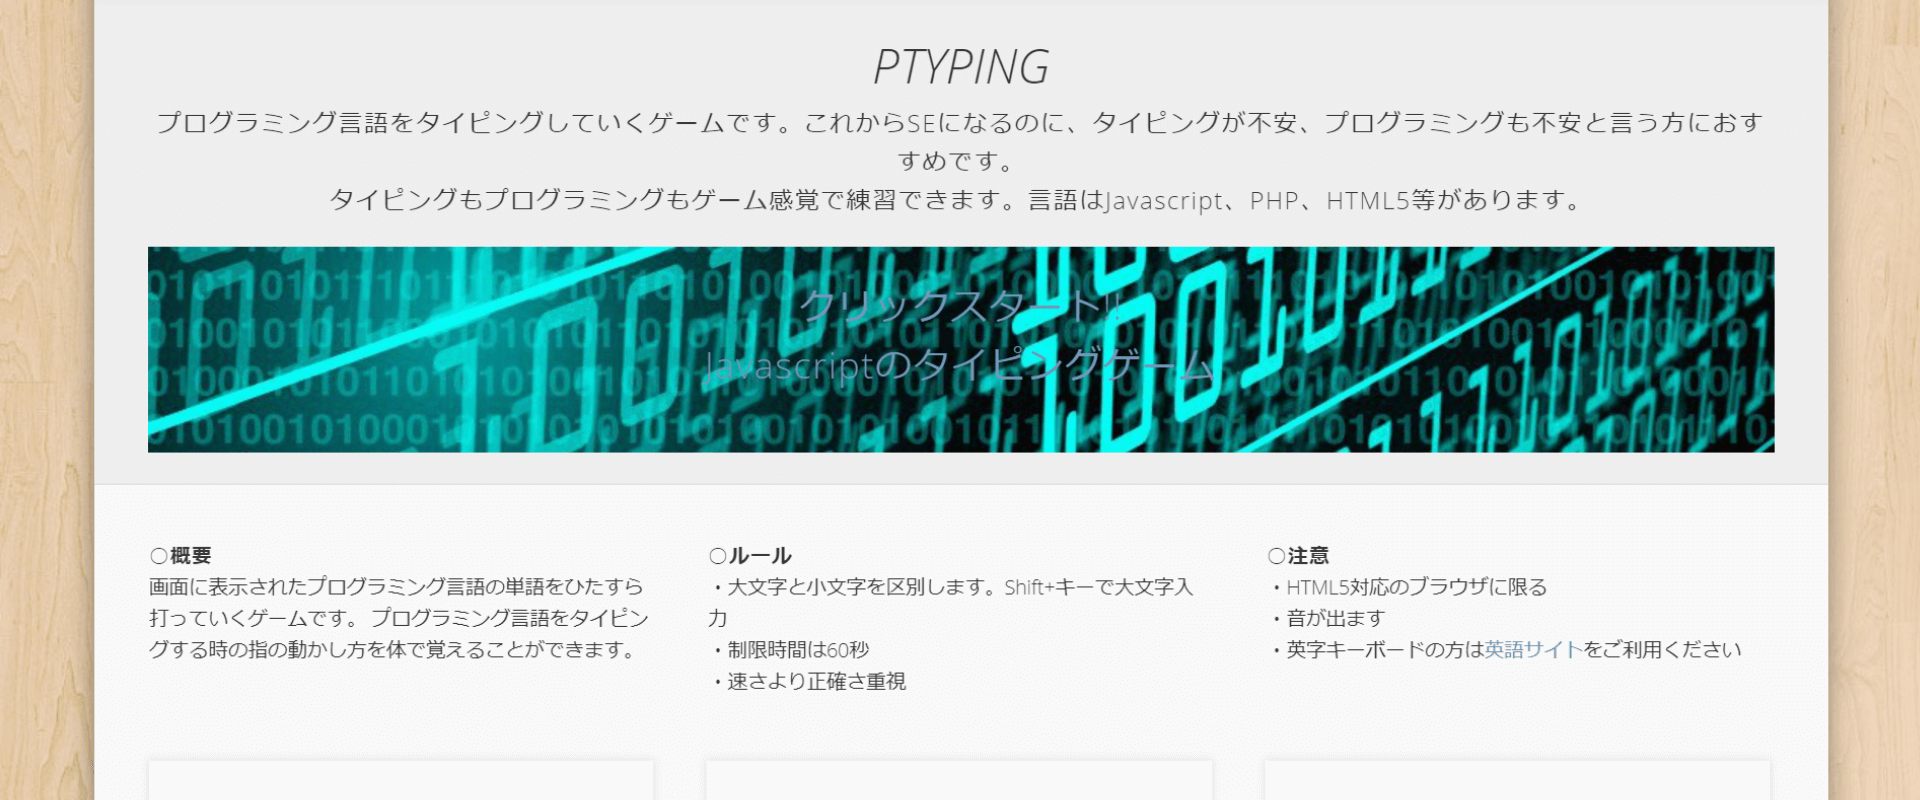 PTYPING